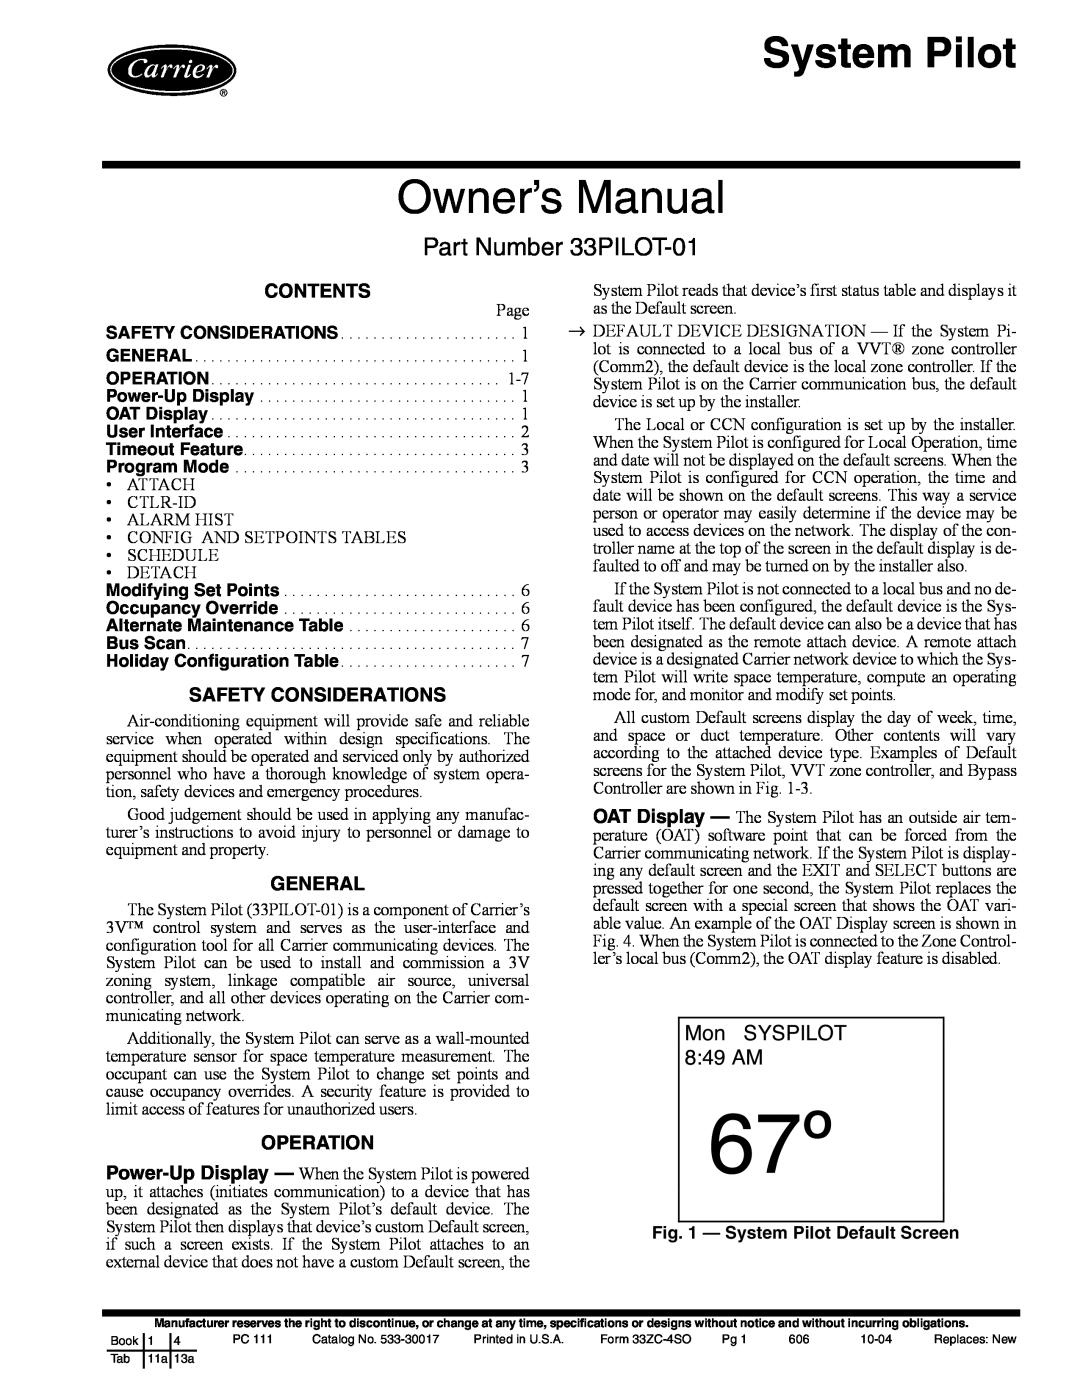 Carrier 33PILOT-01 owner manual Contents, Safety Considerations, General, Operation, System Pilot Default Screen 